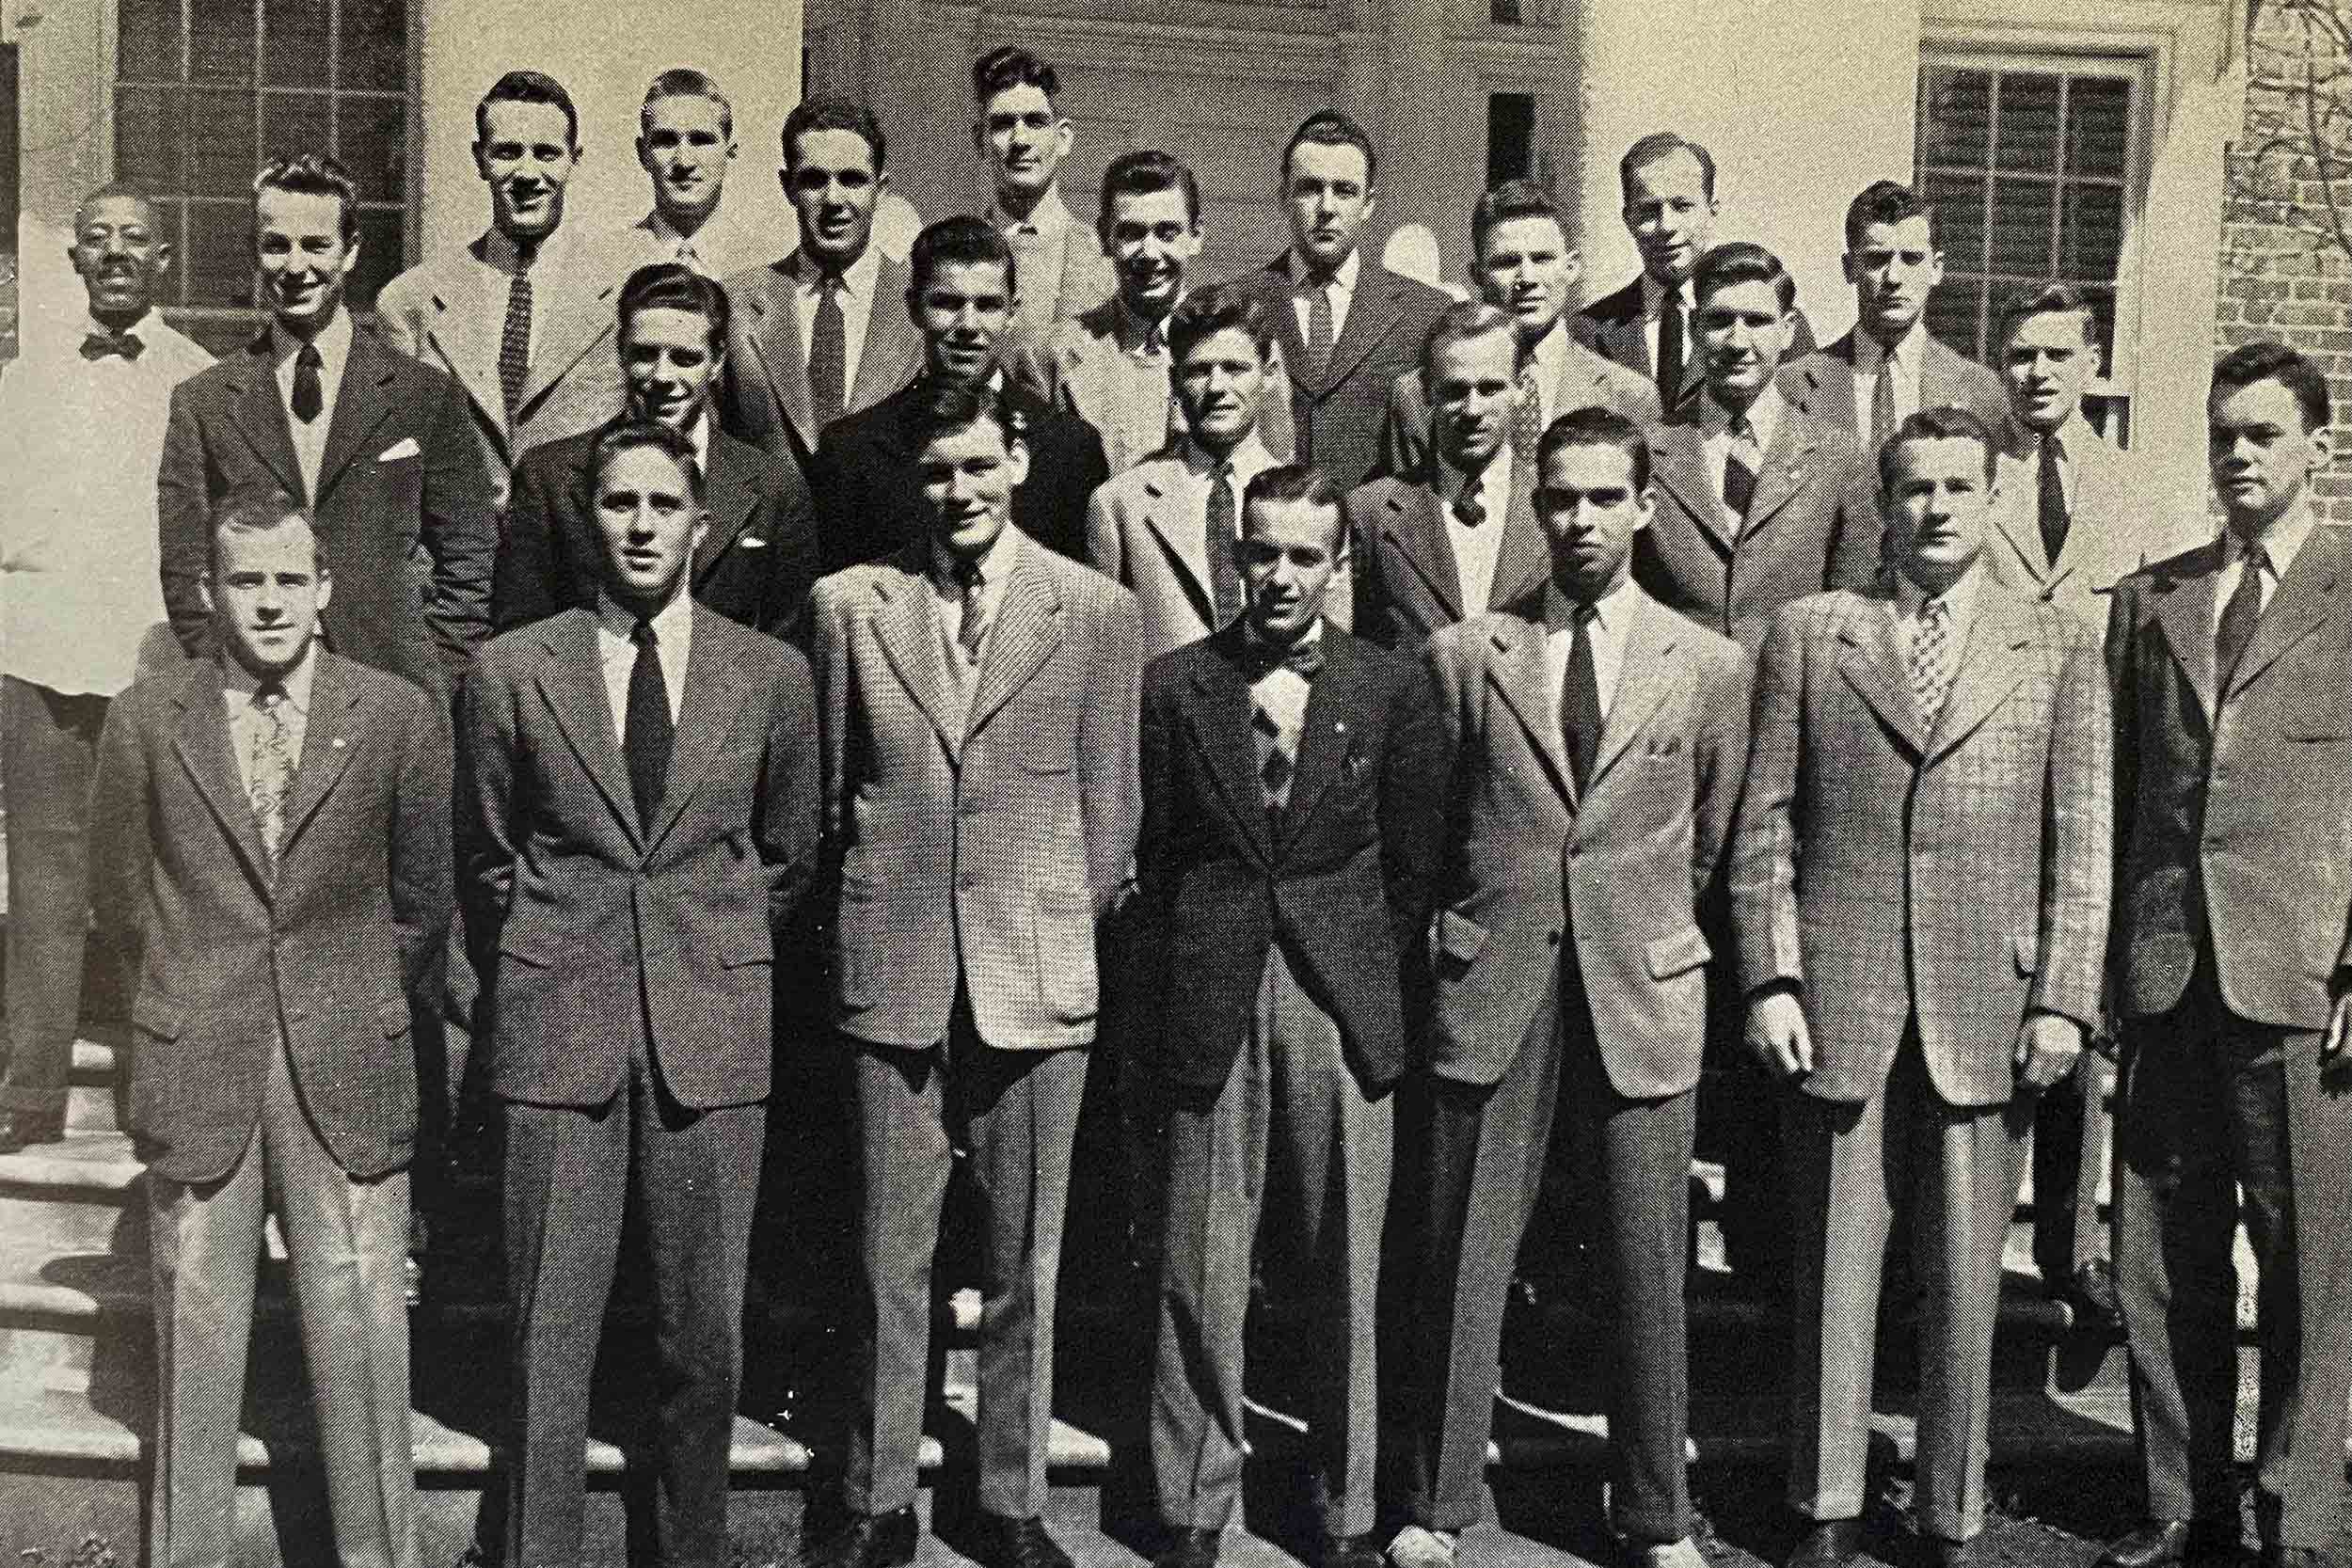 Black and white photo of a group of men standing together on 4 steps posing for a group photo